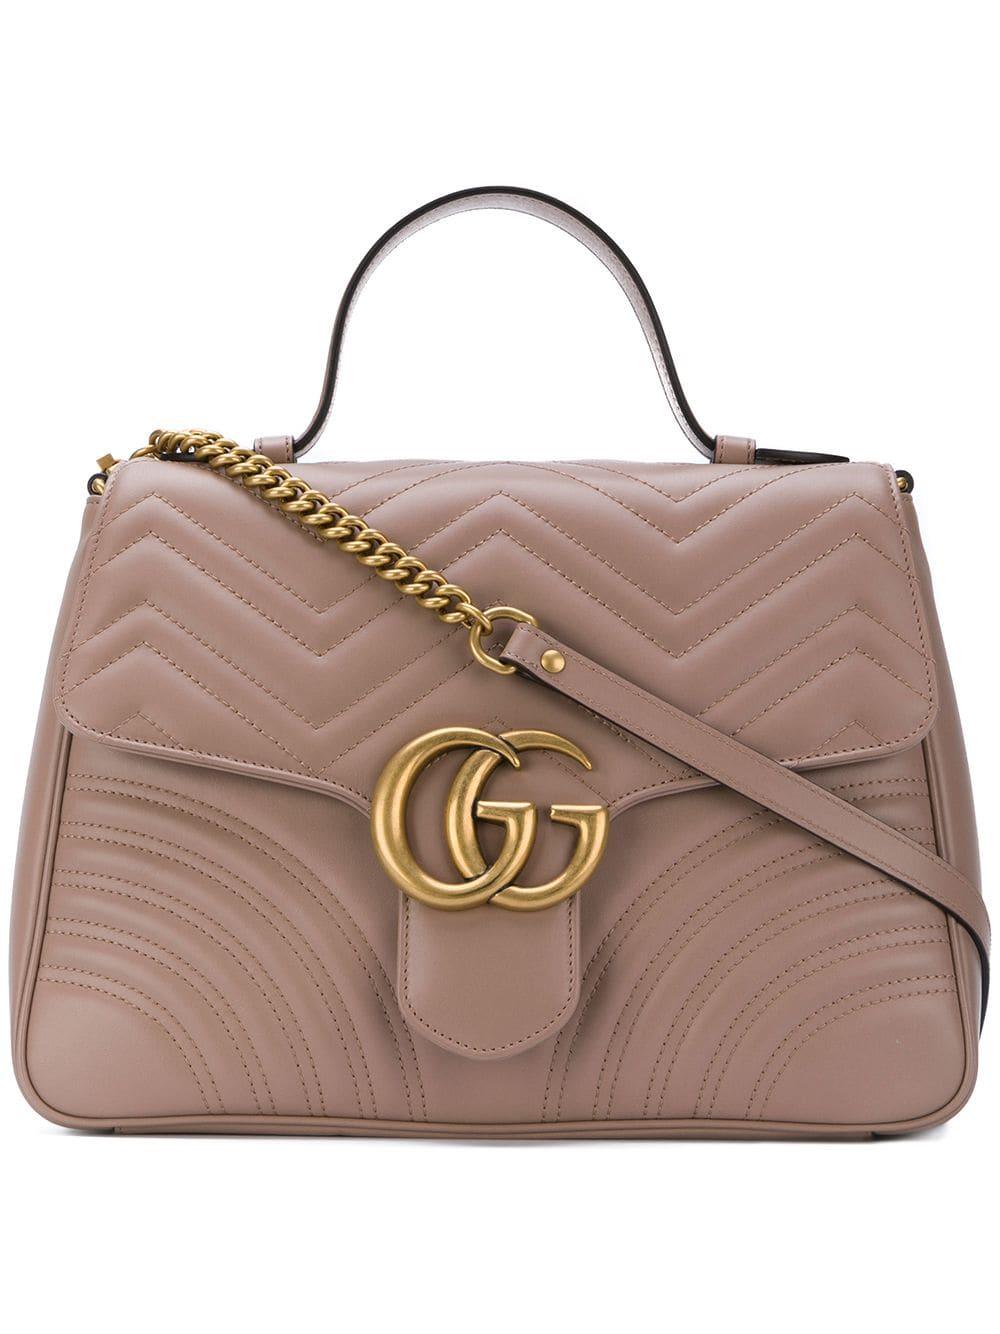 Gucci Leather GG Marmont Medium Top Handle Bag in Brown | Lyst Australia